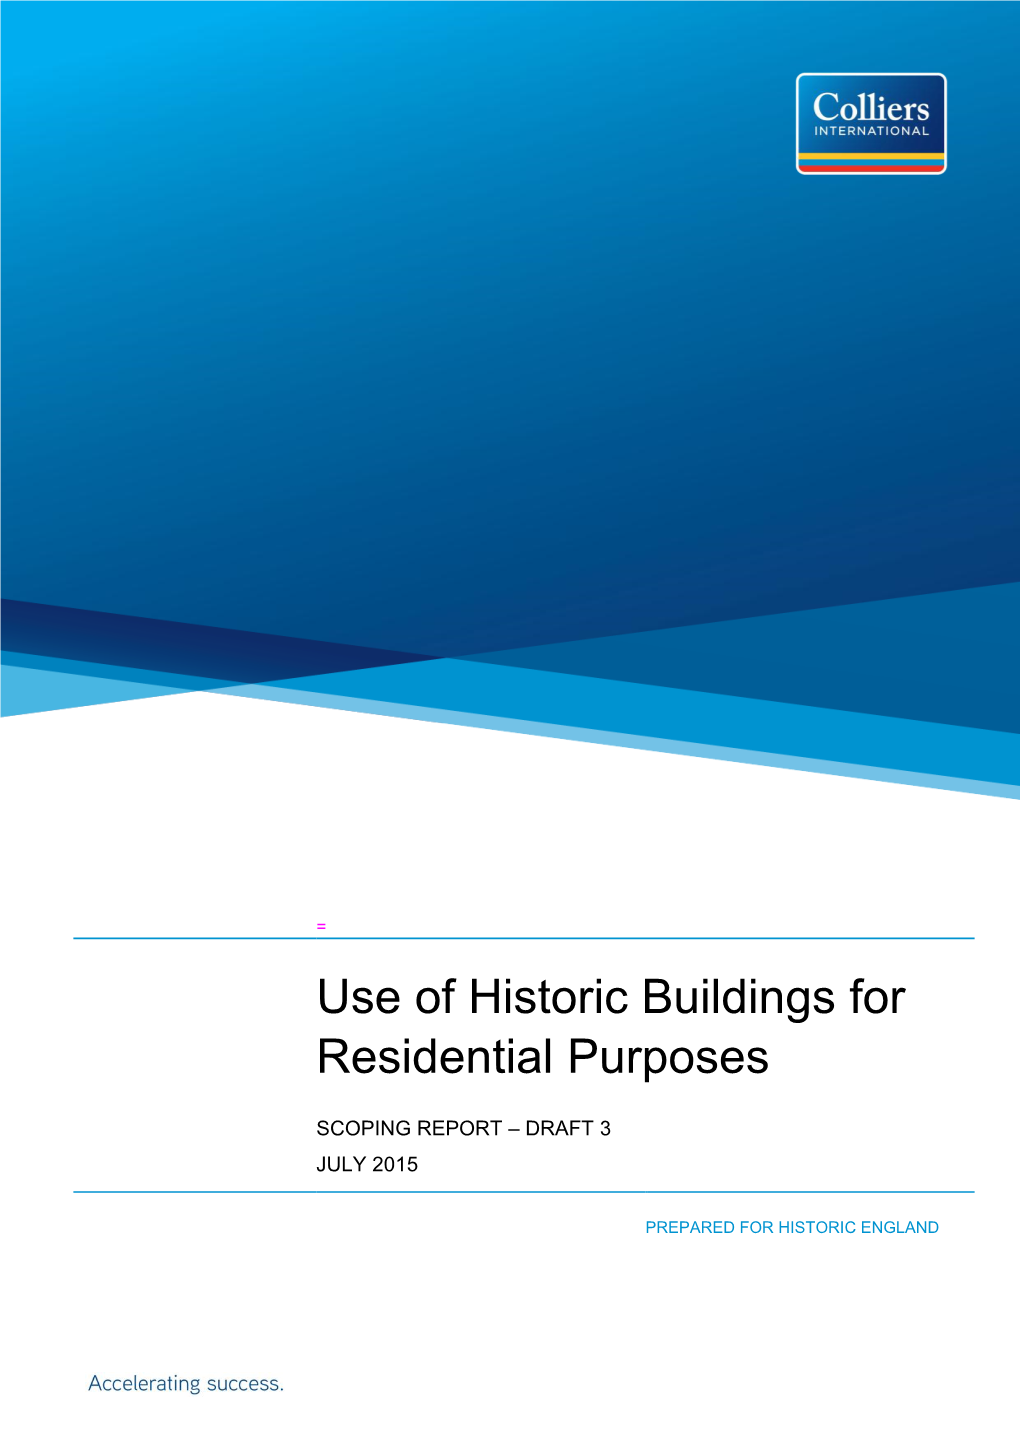 Uses of Historic Buildings for Residential Purposes (Colliers 2015)